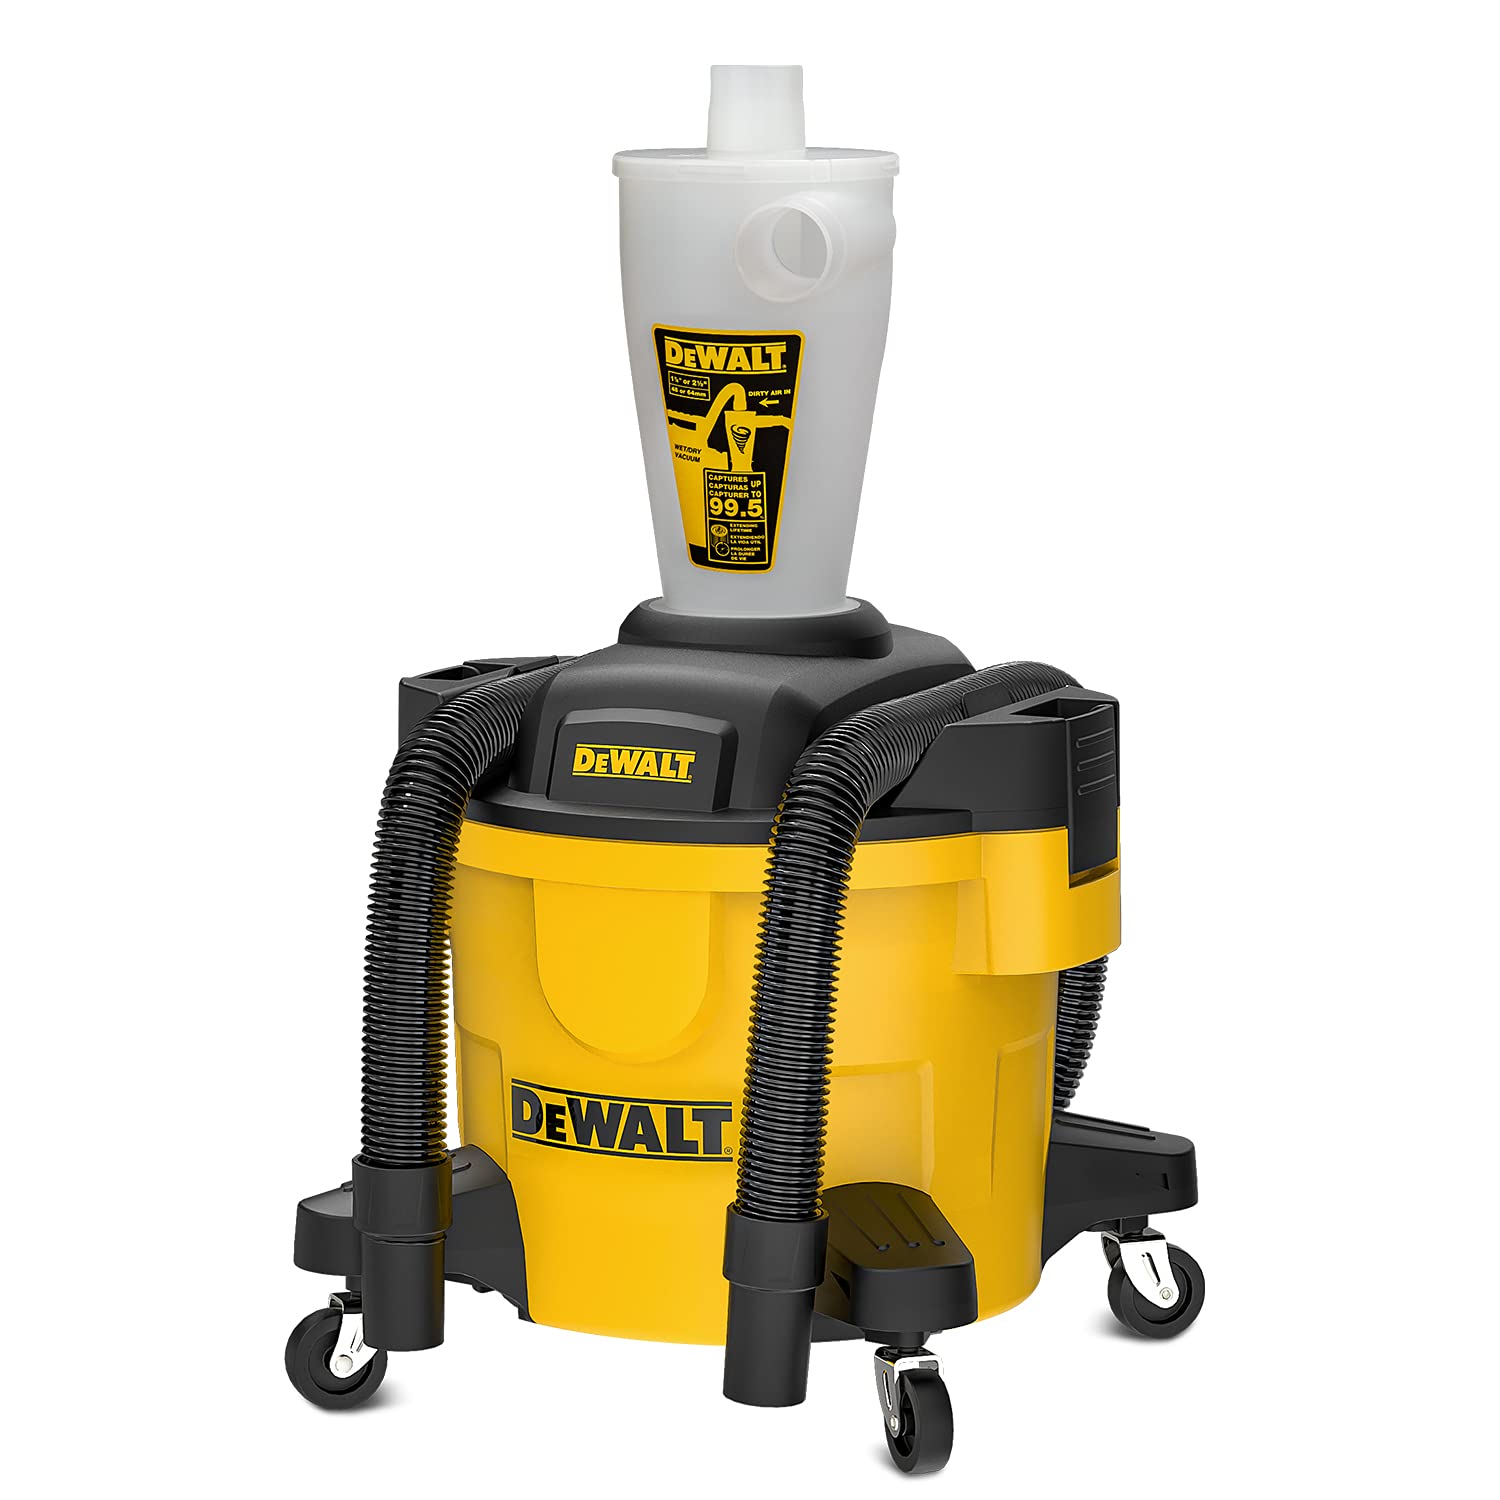 DEWALT Cyclone Dust Collection Separator 23L DXVCS002 Power Tool Services